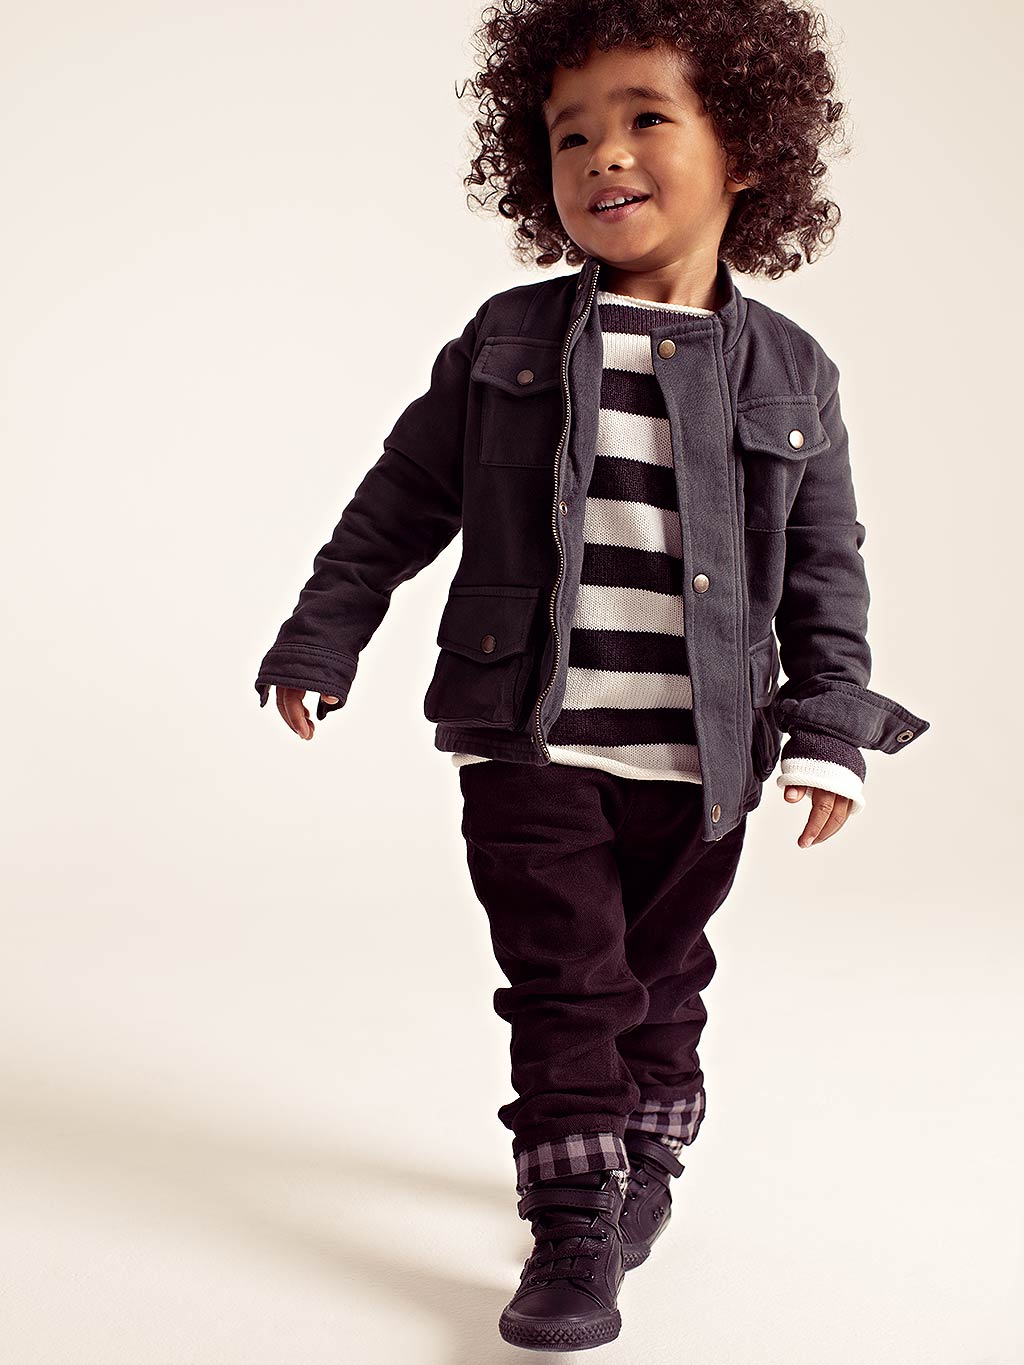 Doesn't Zara make super cute kids clothing? For you, Tegegne...and ...